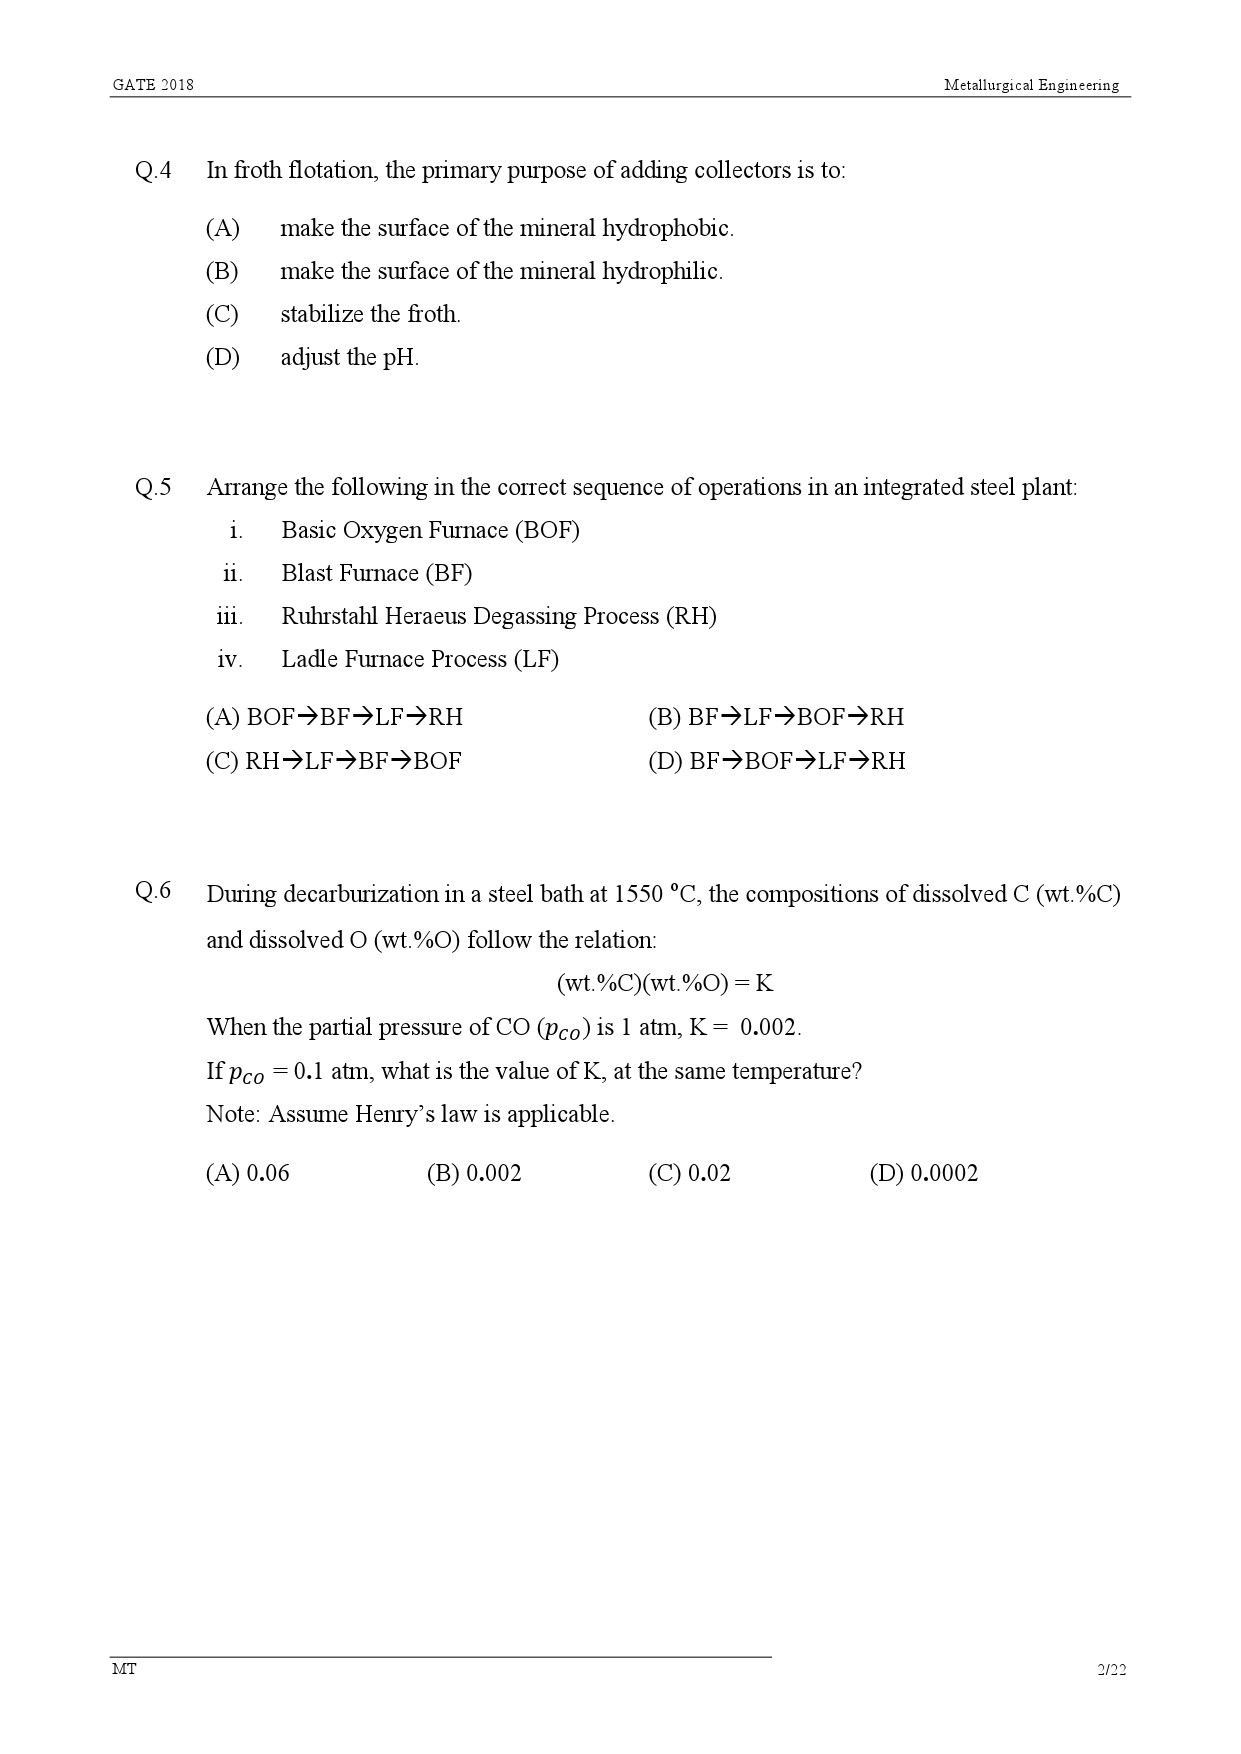 GATE Exam Question Paper 2018 Metallurgical Engineering 4